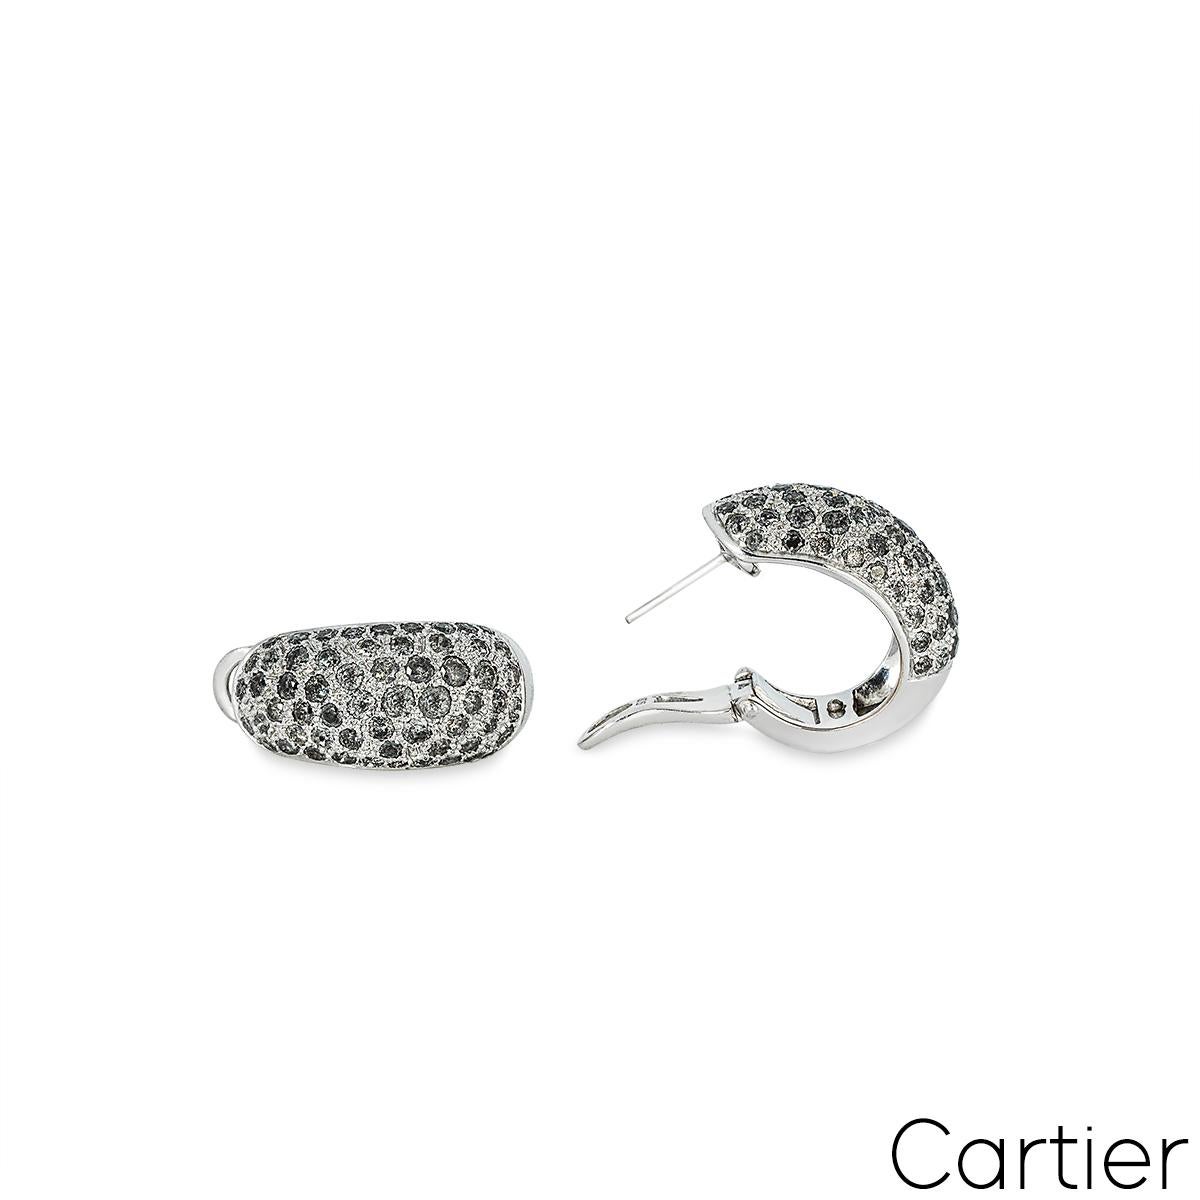 Cartier Sauvage Metissage White Gold Grey Diamond Bombe Earrings In Excellent Condition For Sale In London, GB